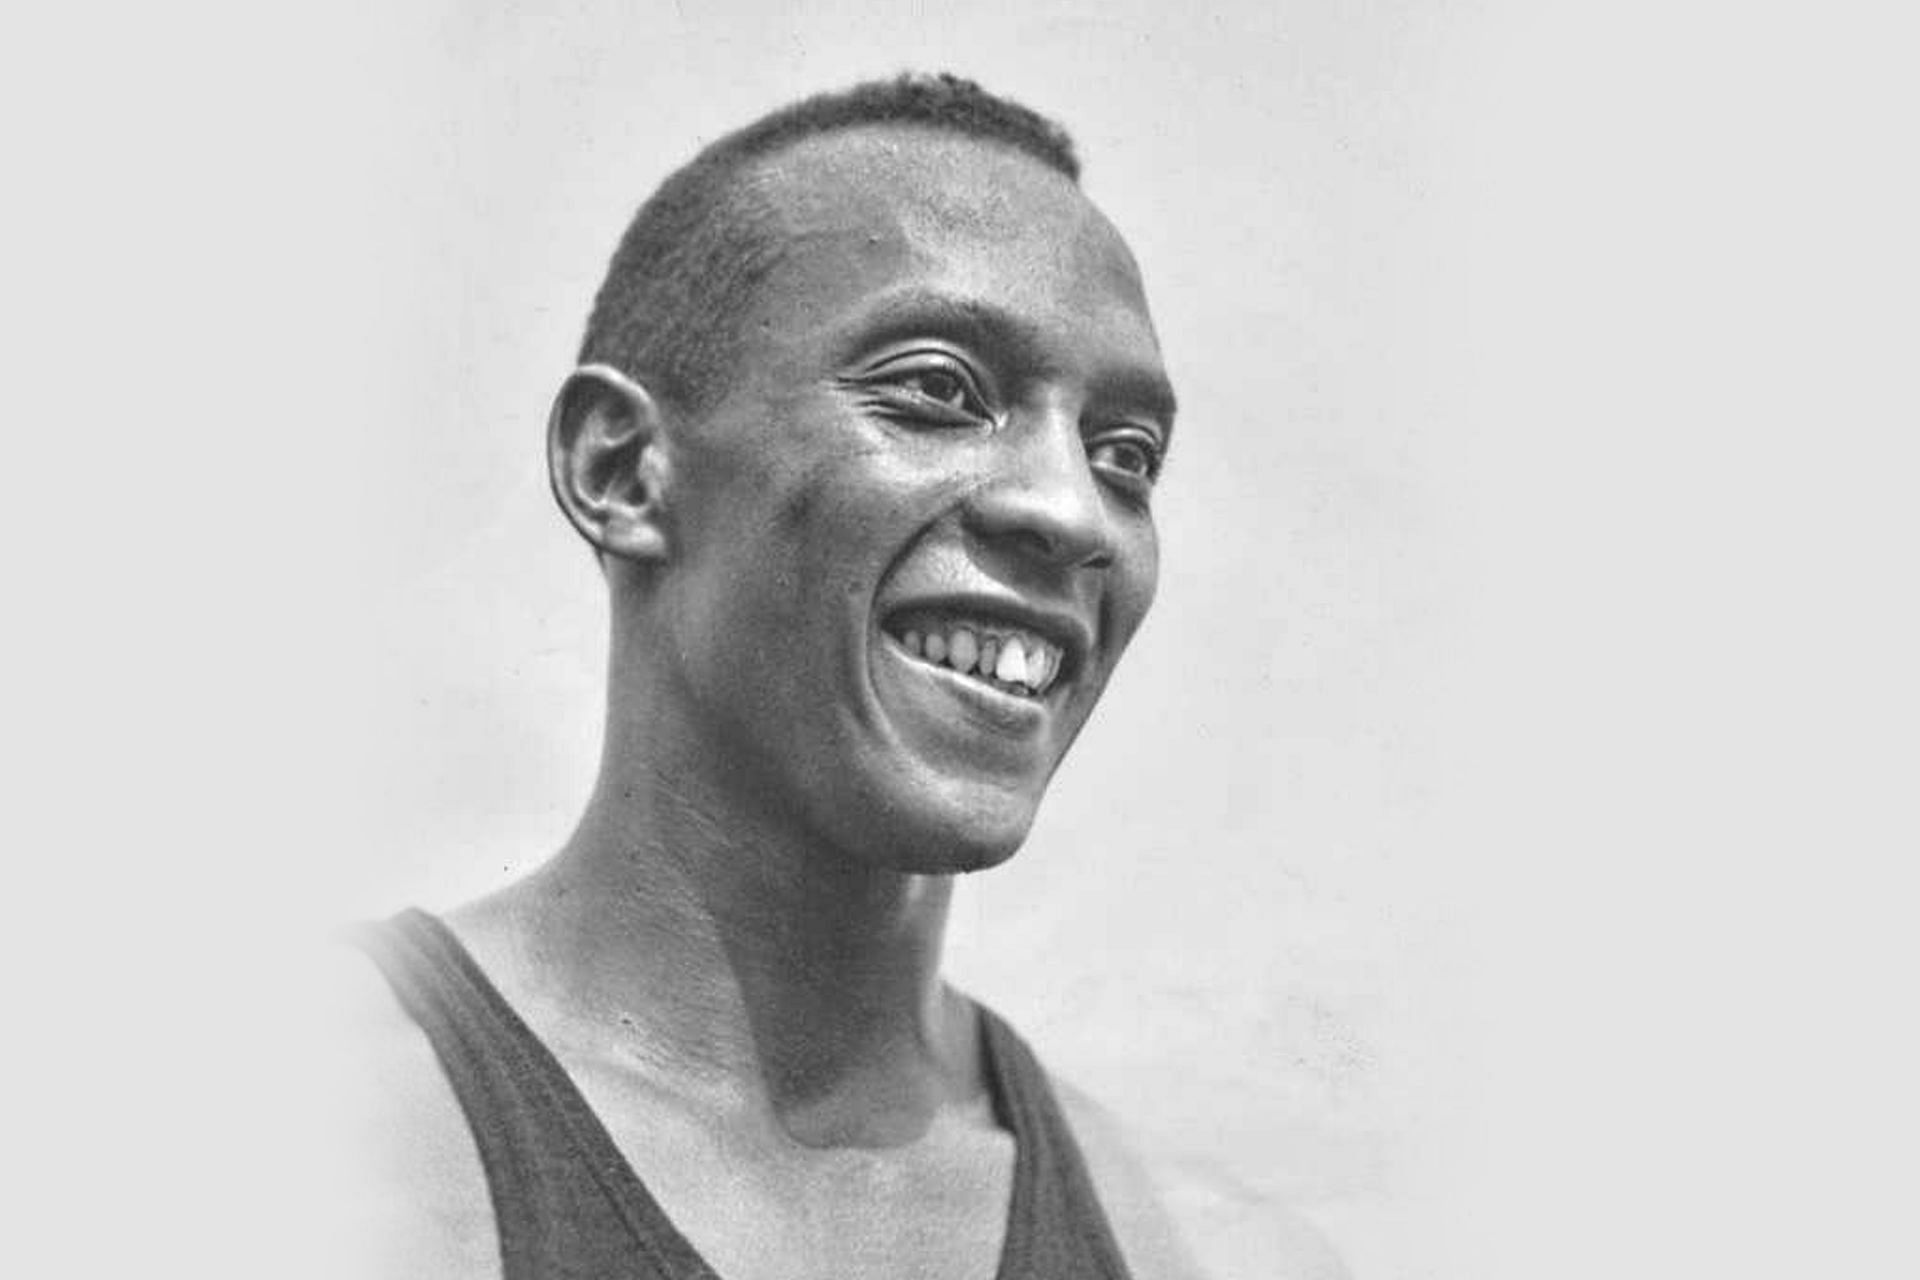 Jesse Owens was a renowned track and field American athlete (Image via Wikipedia)